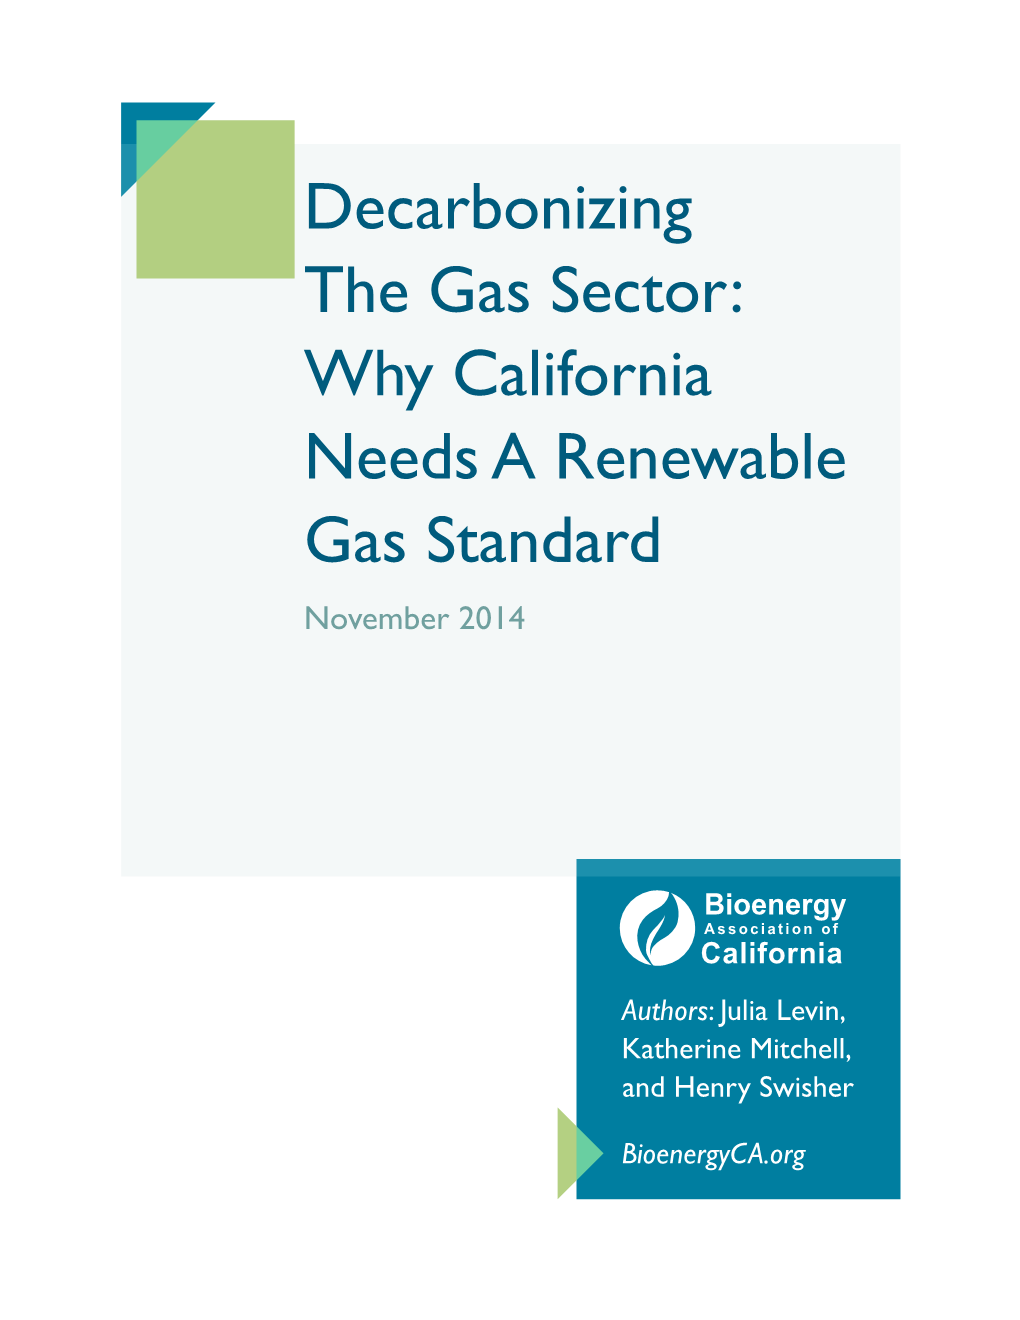 Decarbonizing the Gas Sector: Why California Needs a Renewable Gas Standard November 2014